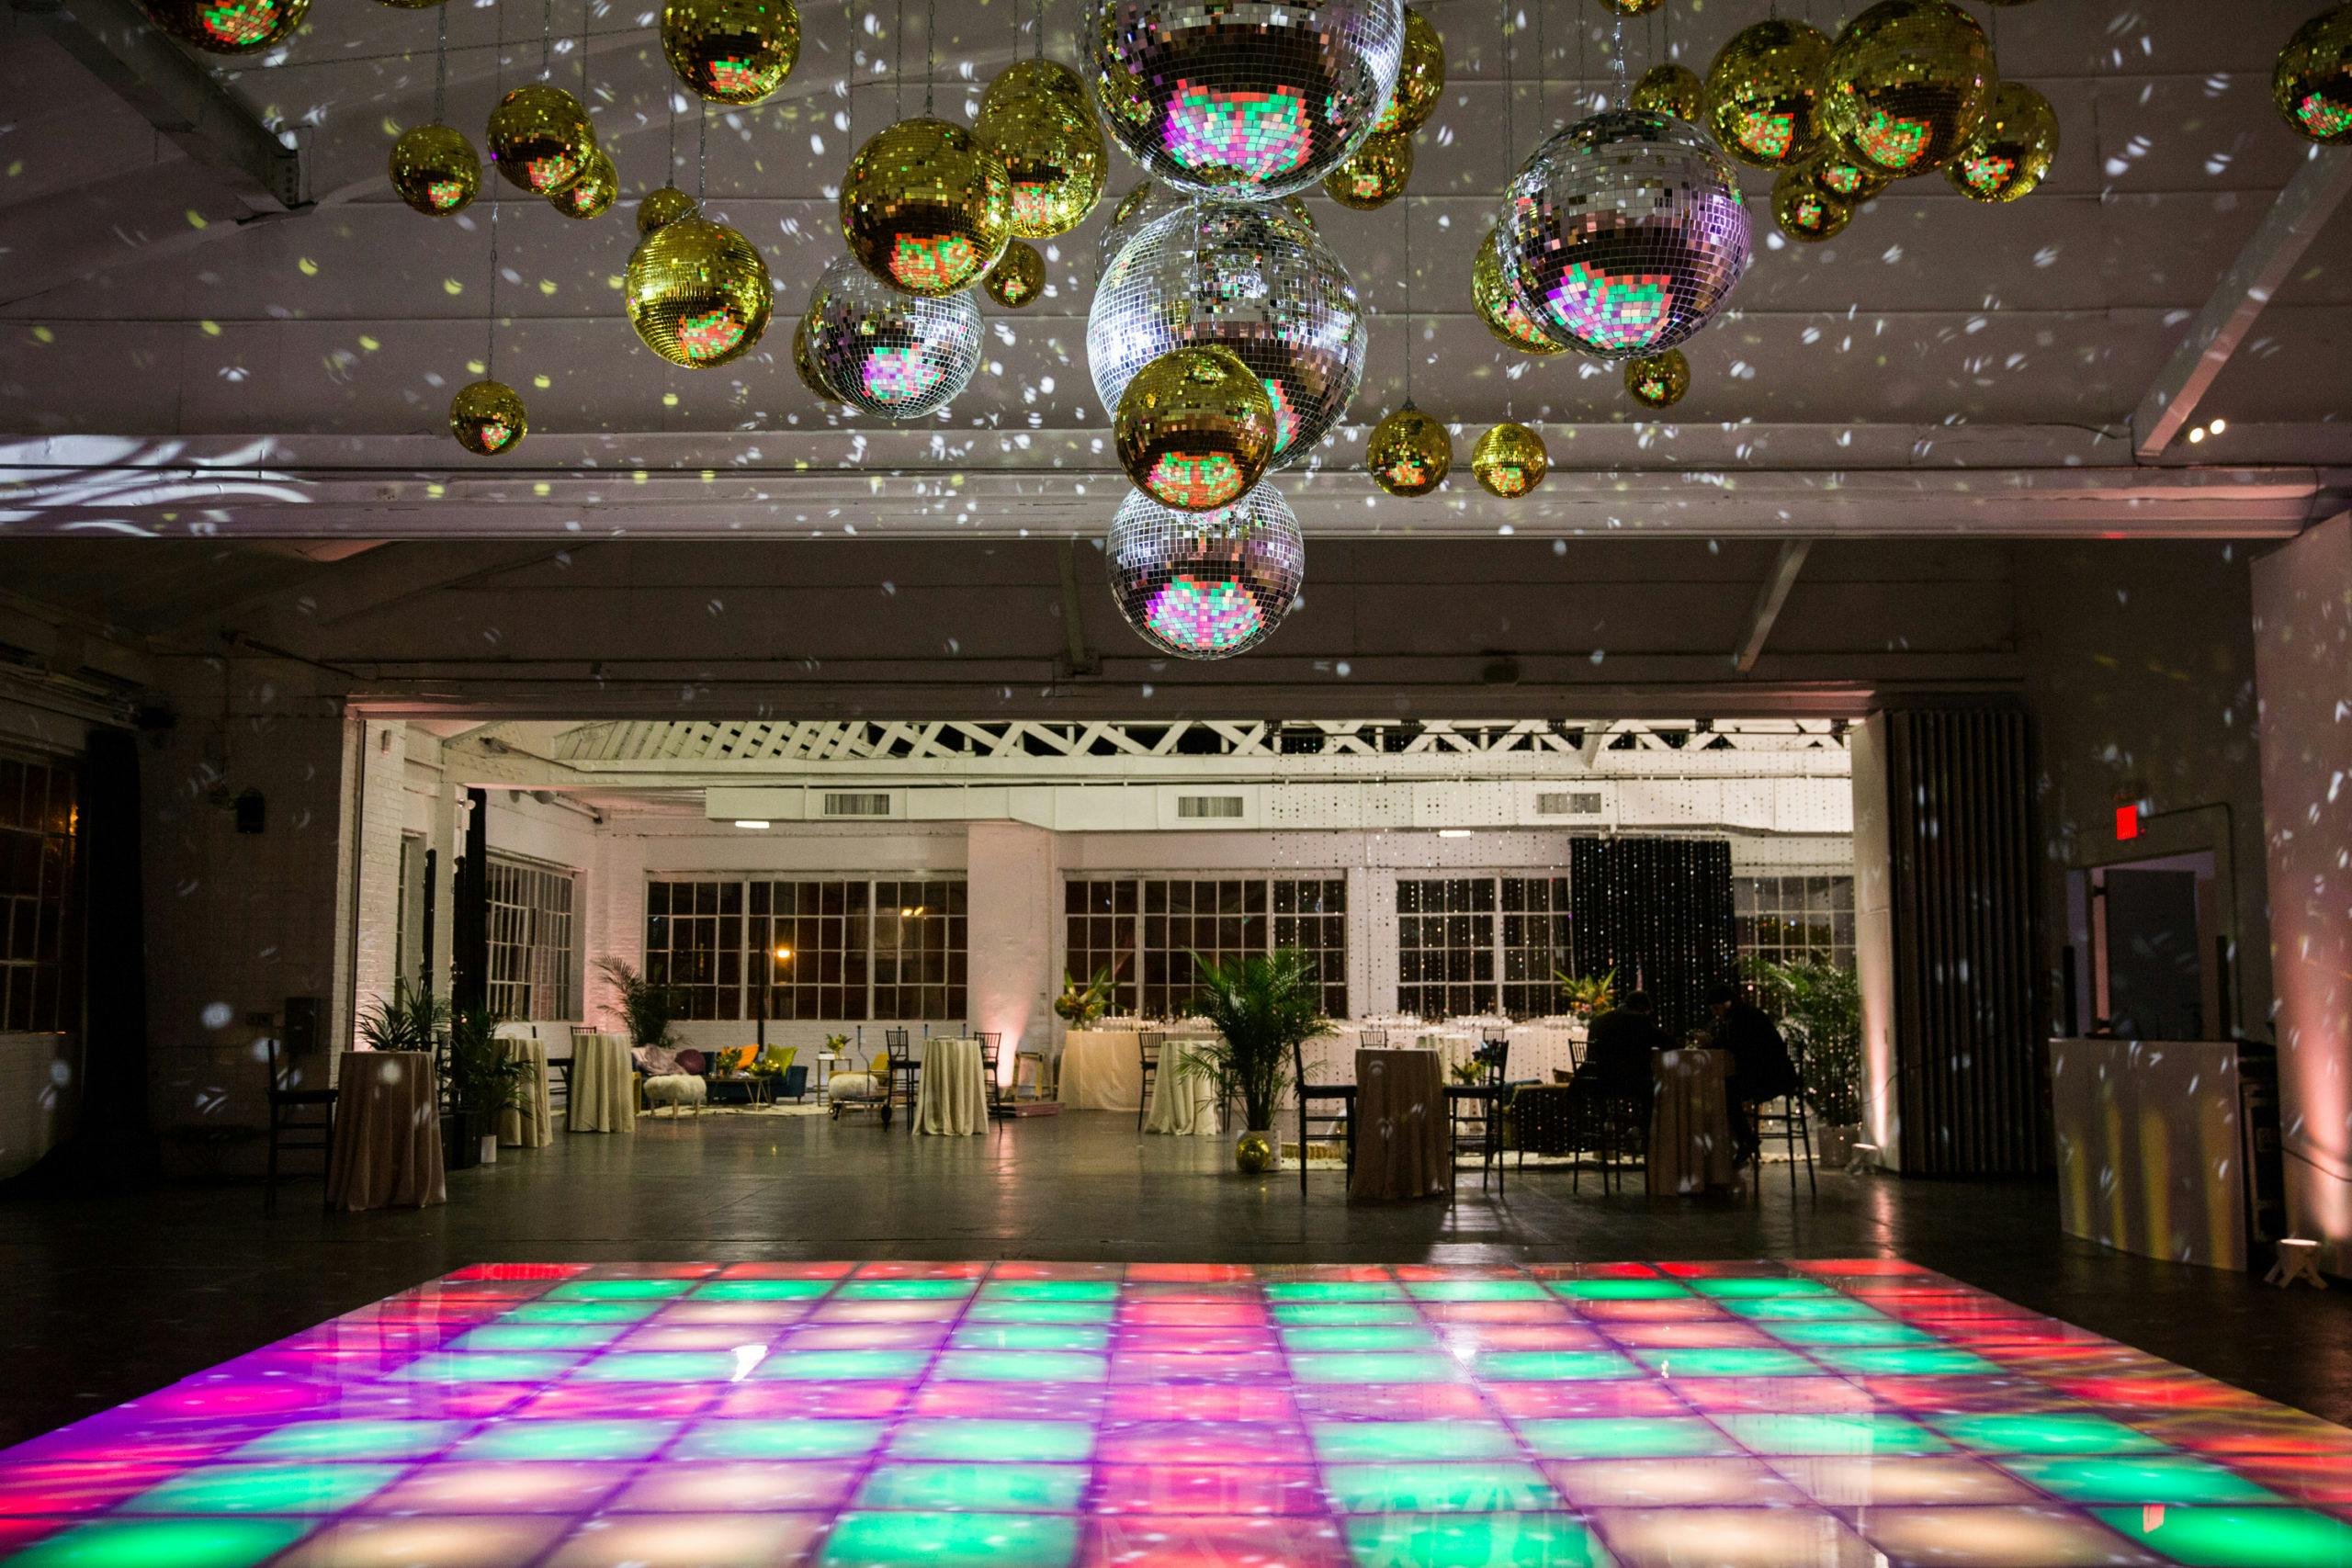 Covered in 30,000 Glittery Tiles, This Chair Brings the Disco Party Home